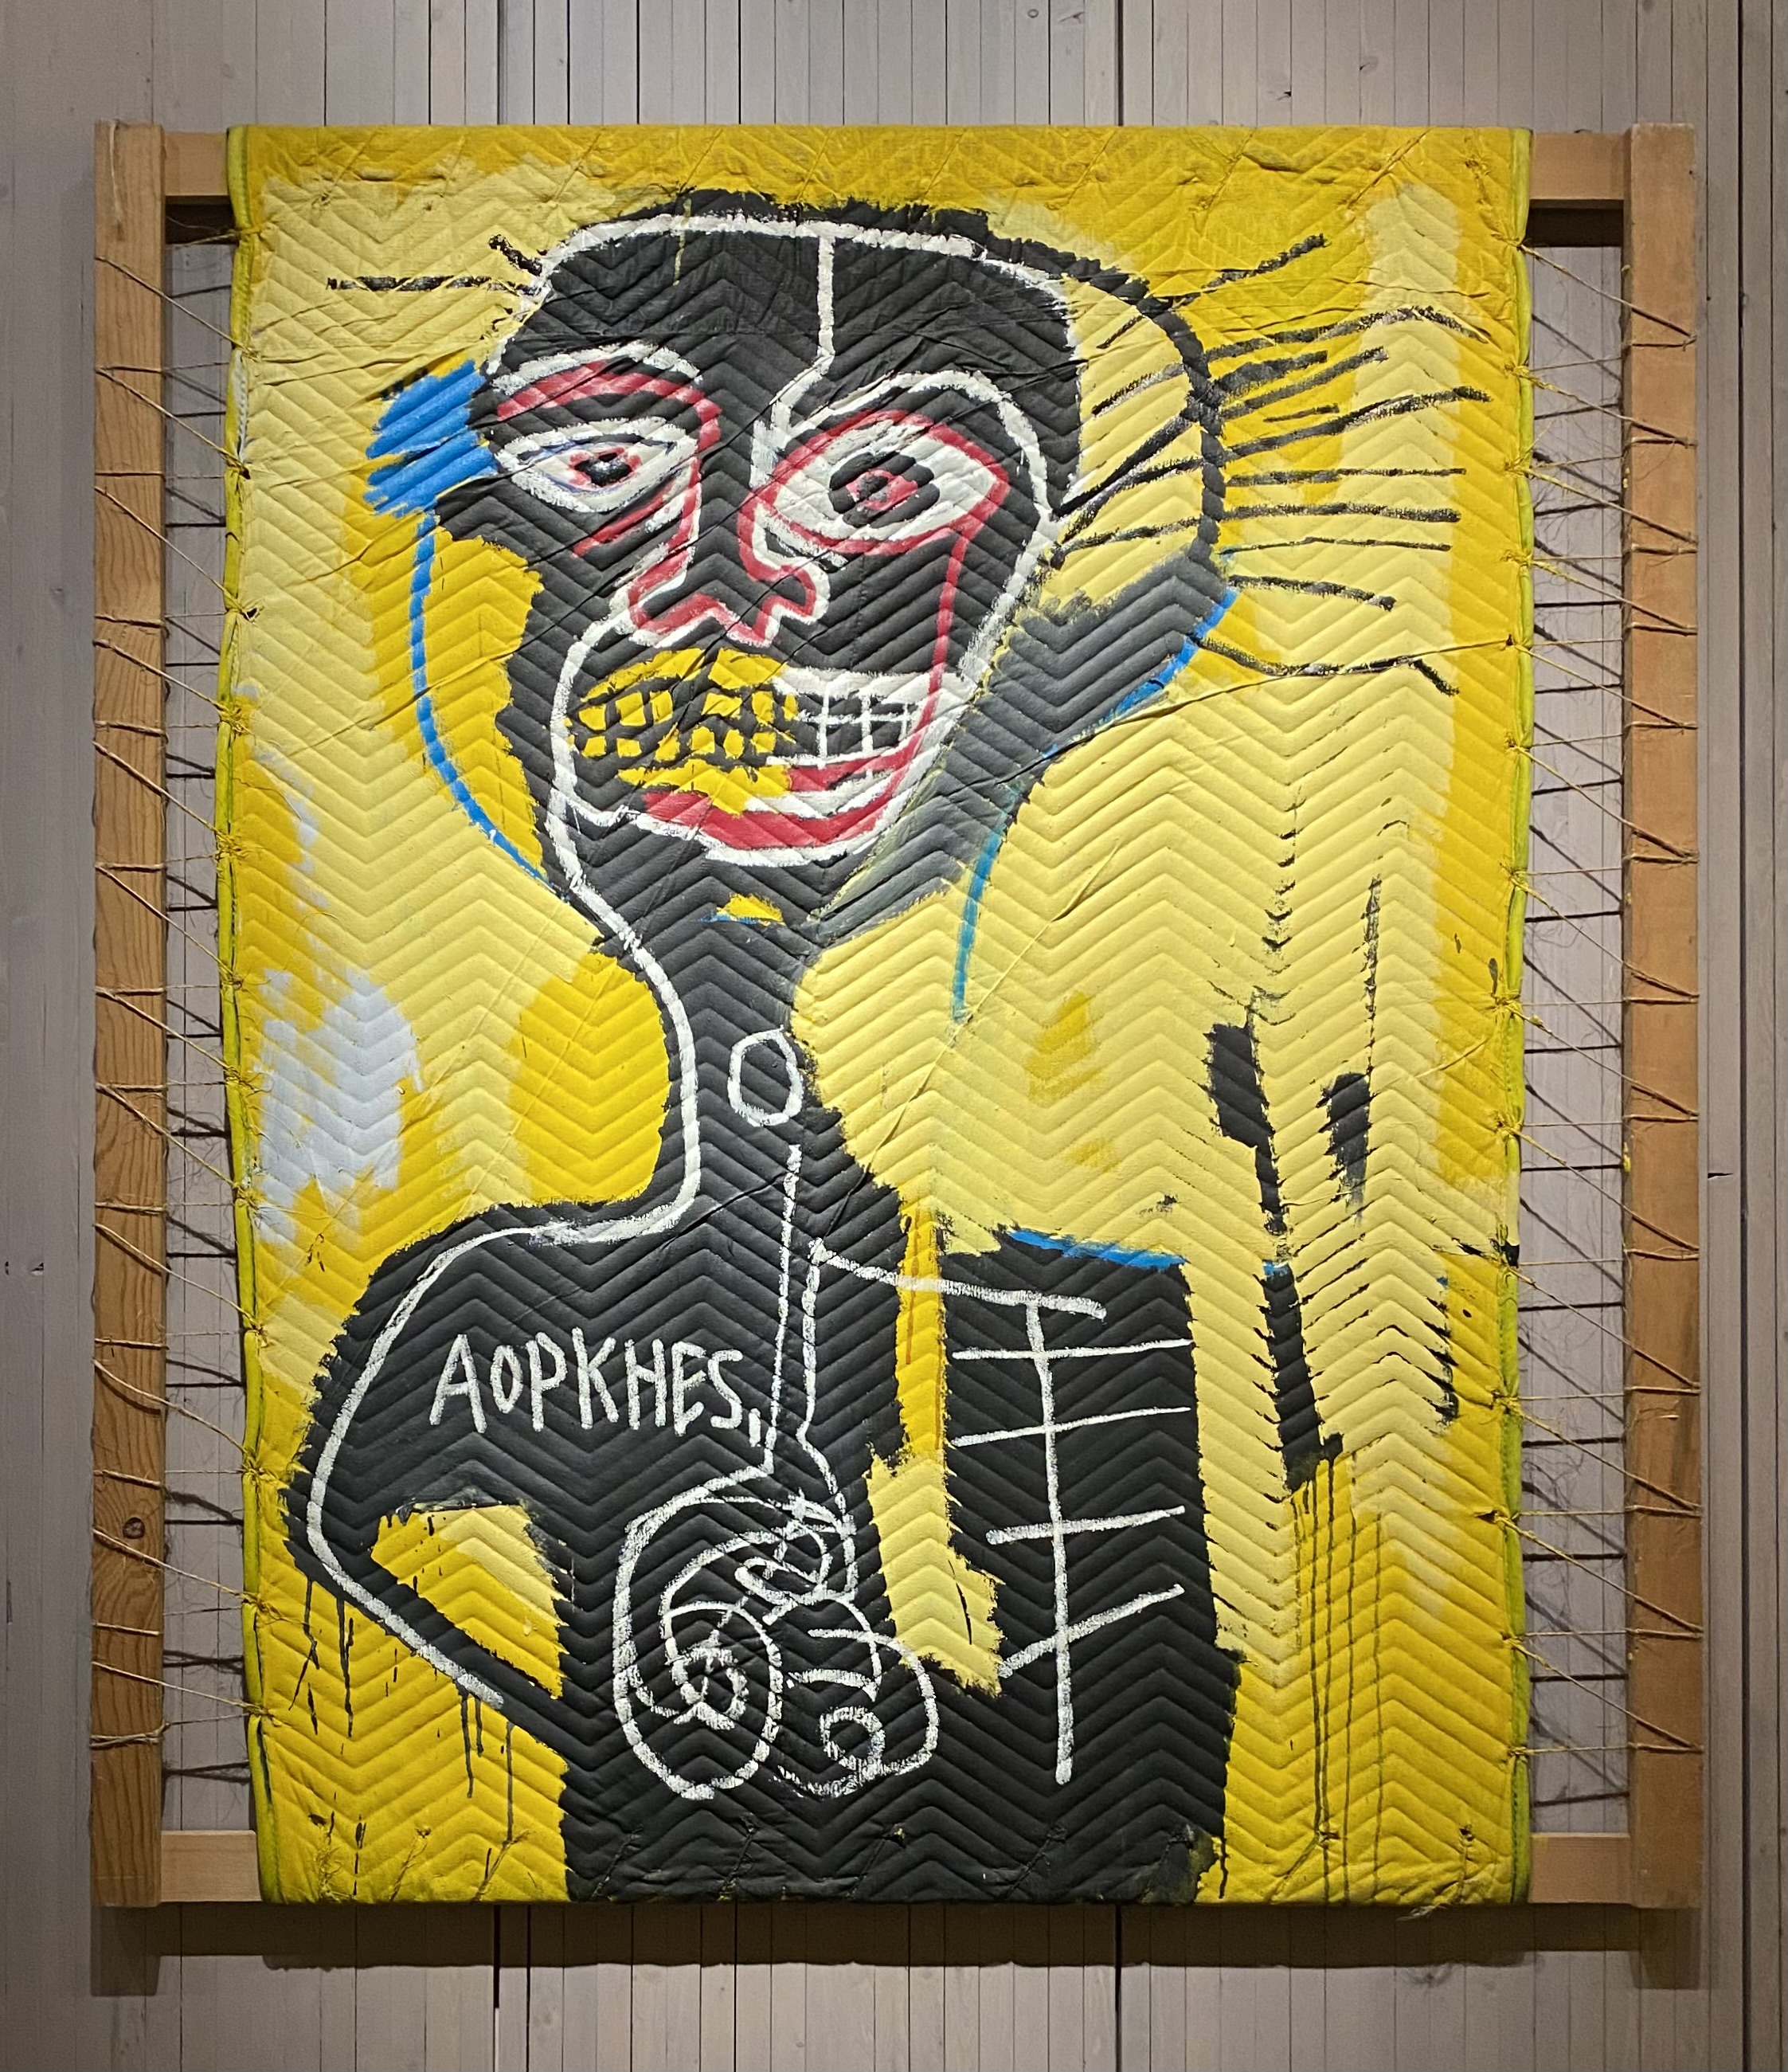 Painting by Jean-Michel Basquiat